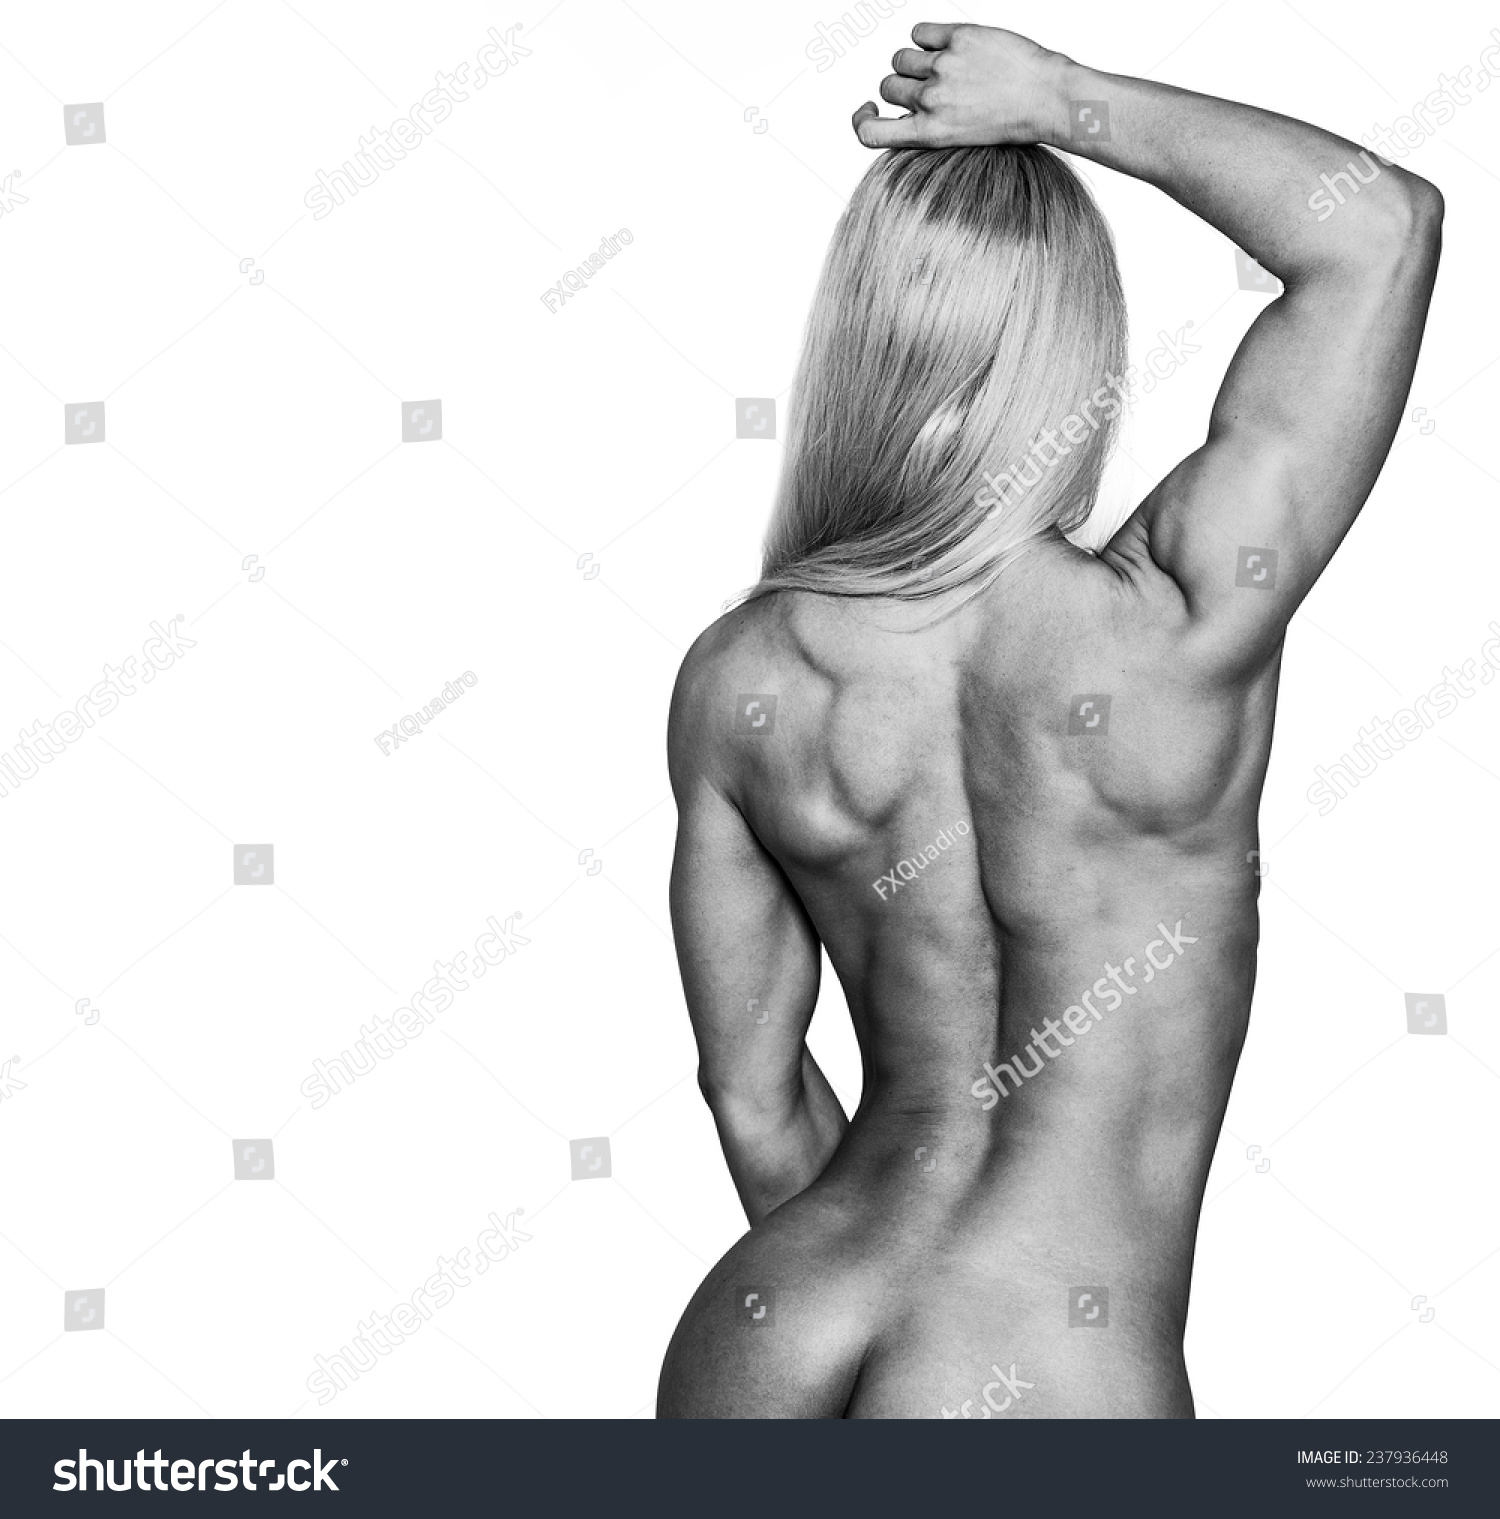 Fit Bodies Nude